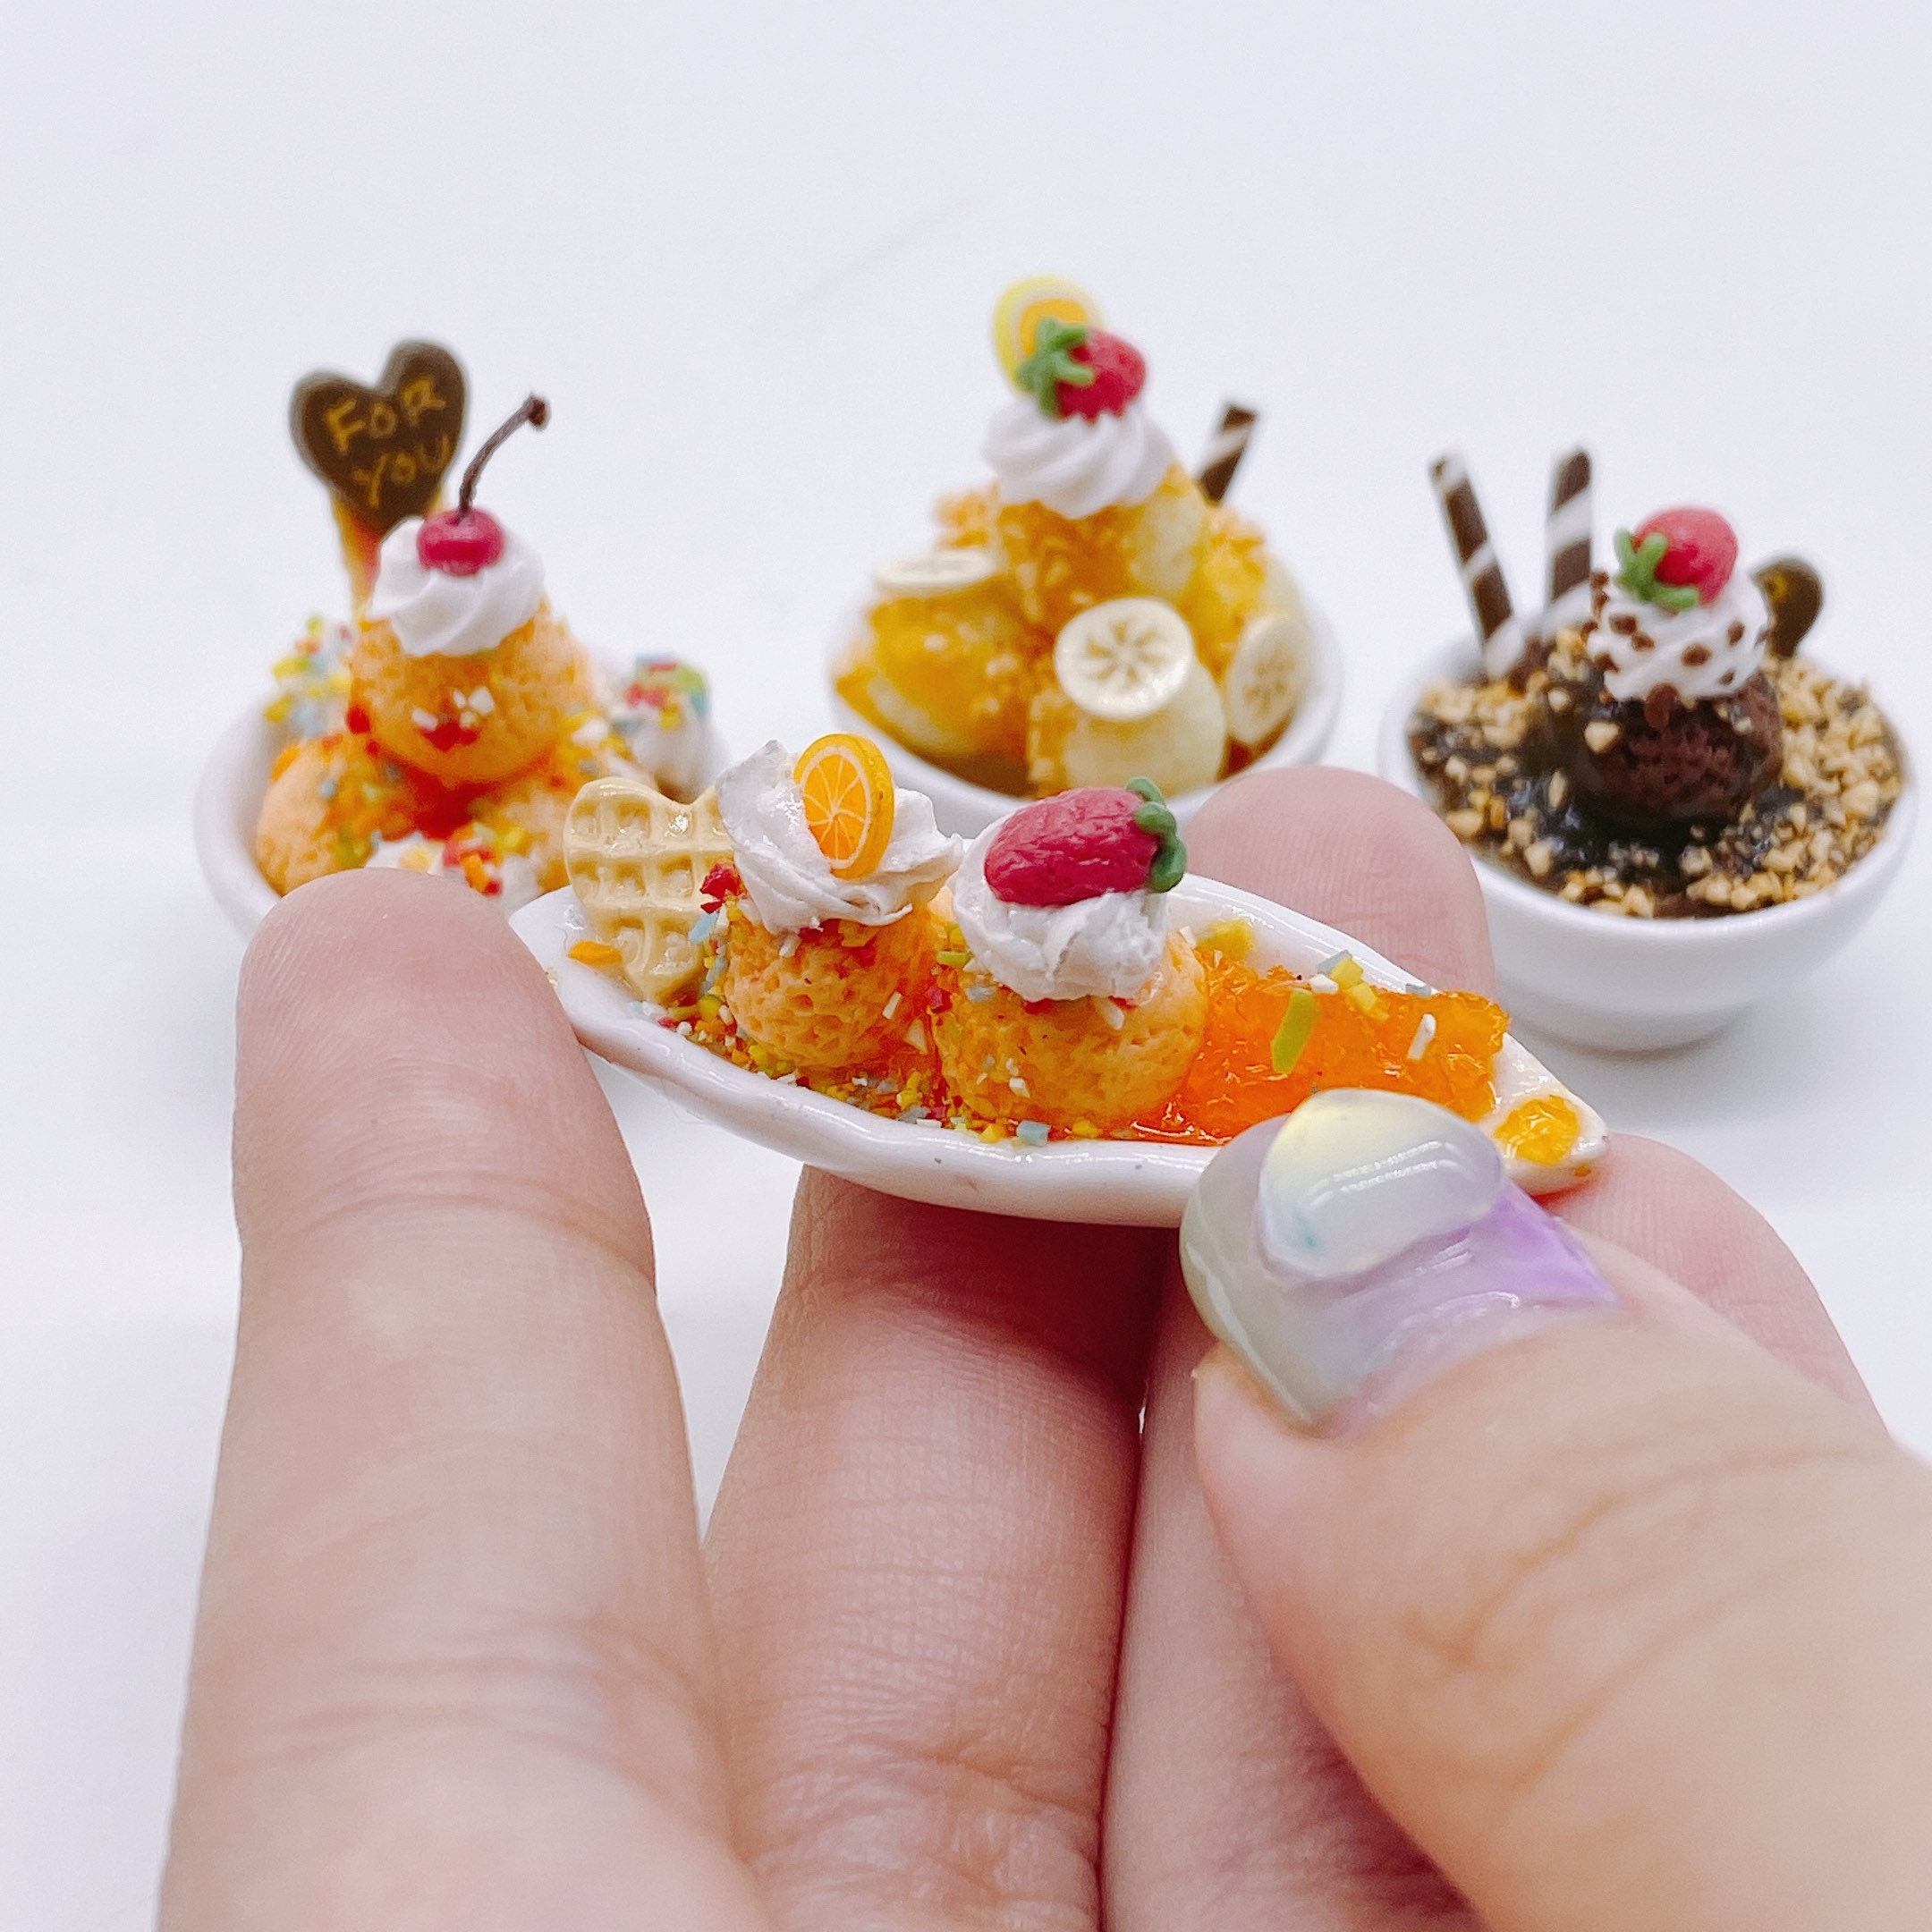 4 Pieces Miniature Sweet Ice-cream on Bowl Lovely for - Etsy